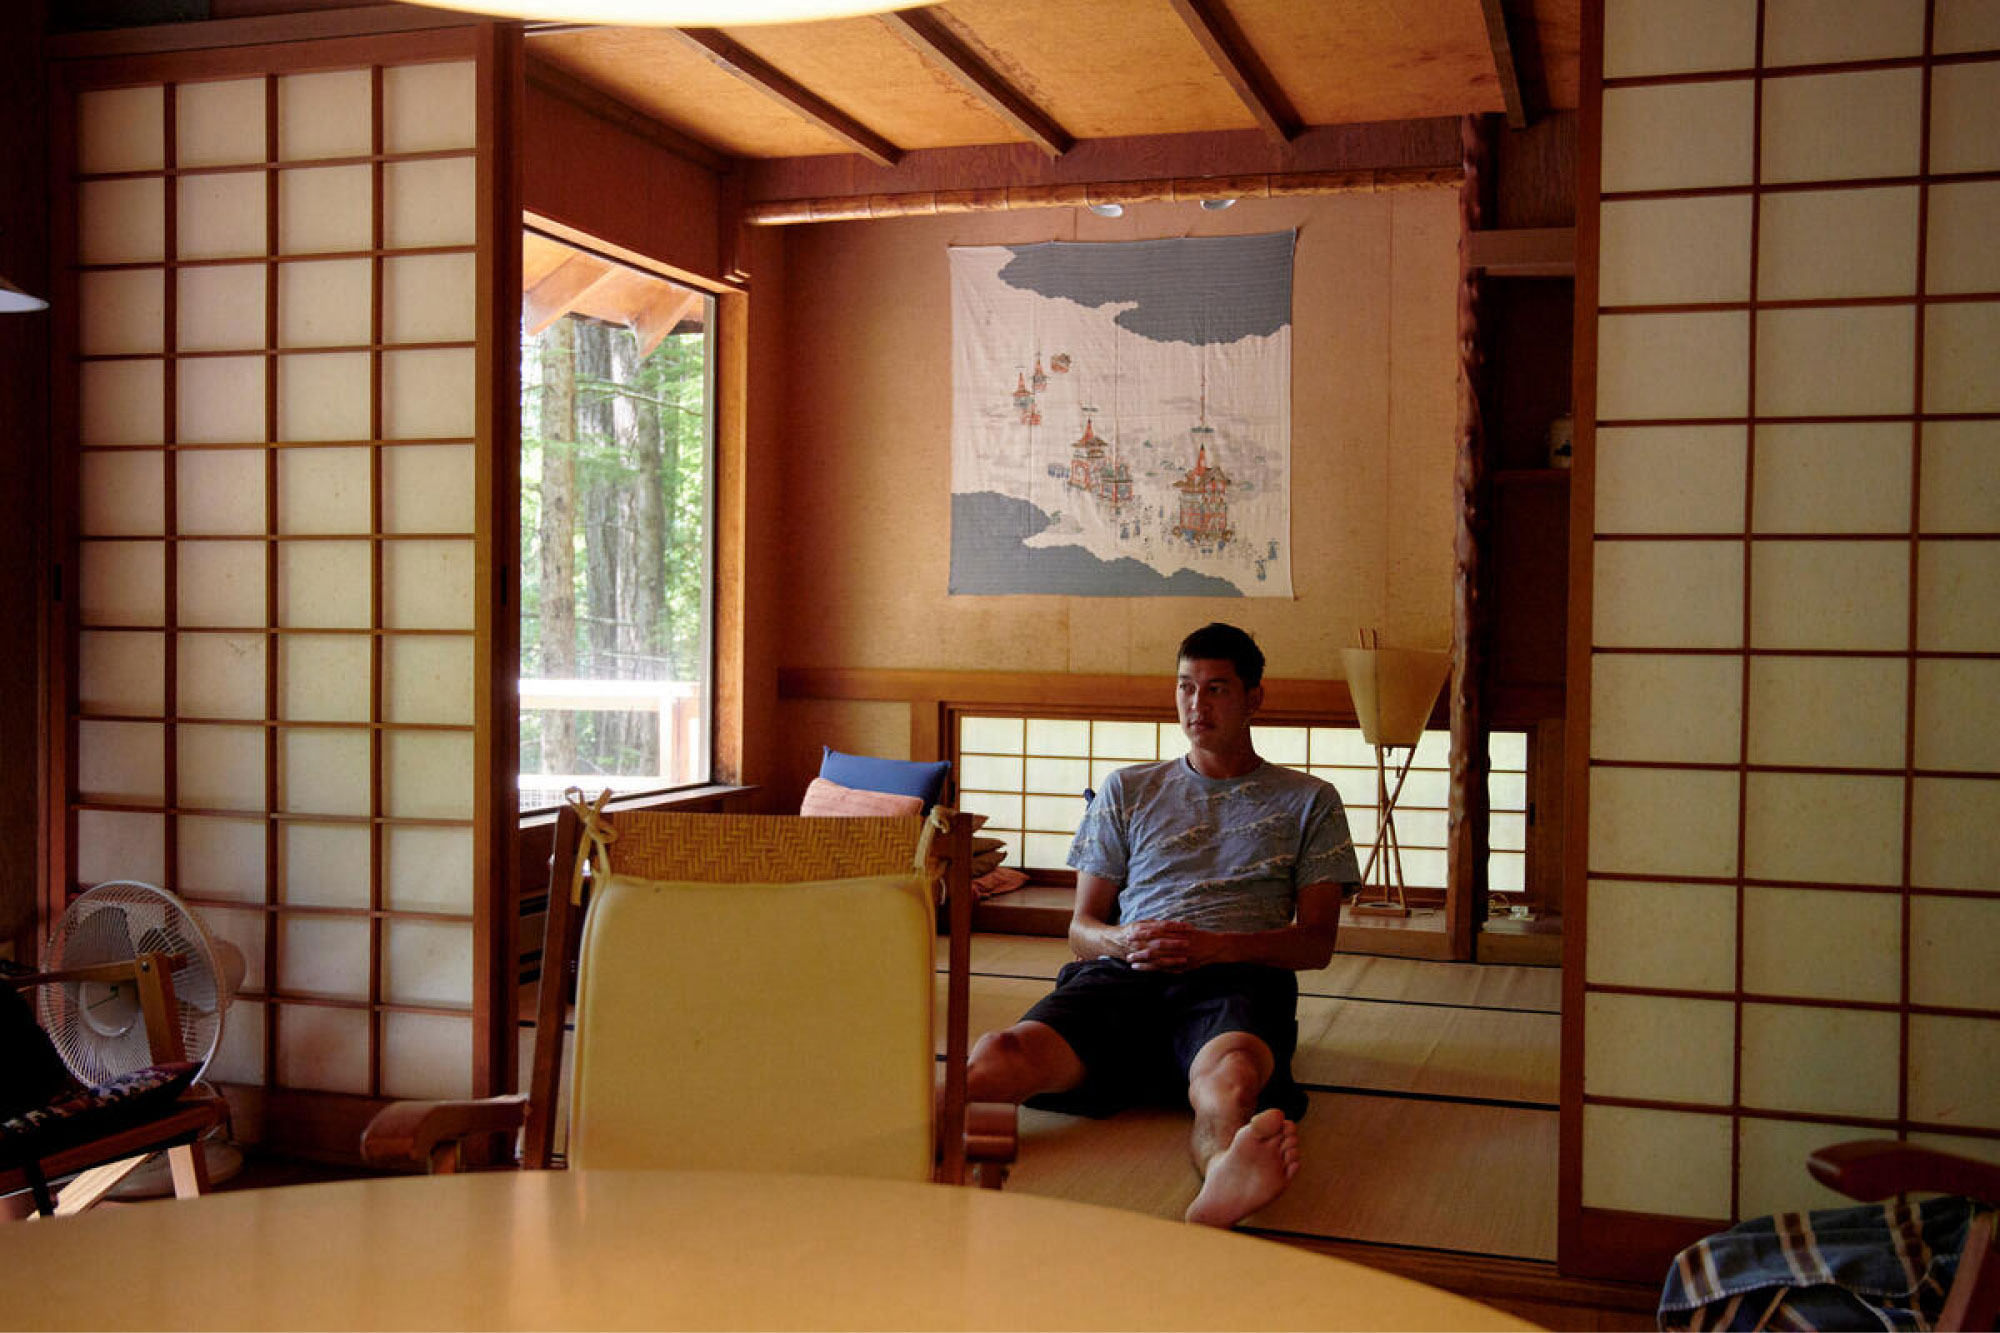 A man sits on a tatami mat floor inside of a japanese-inspired room.